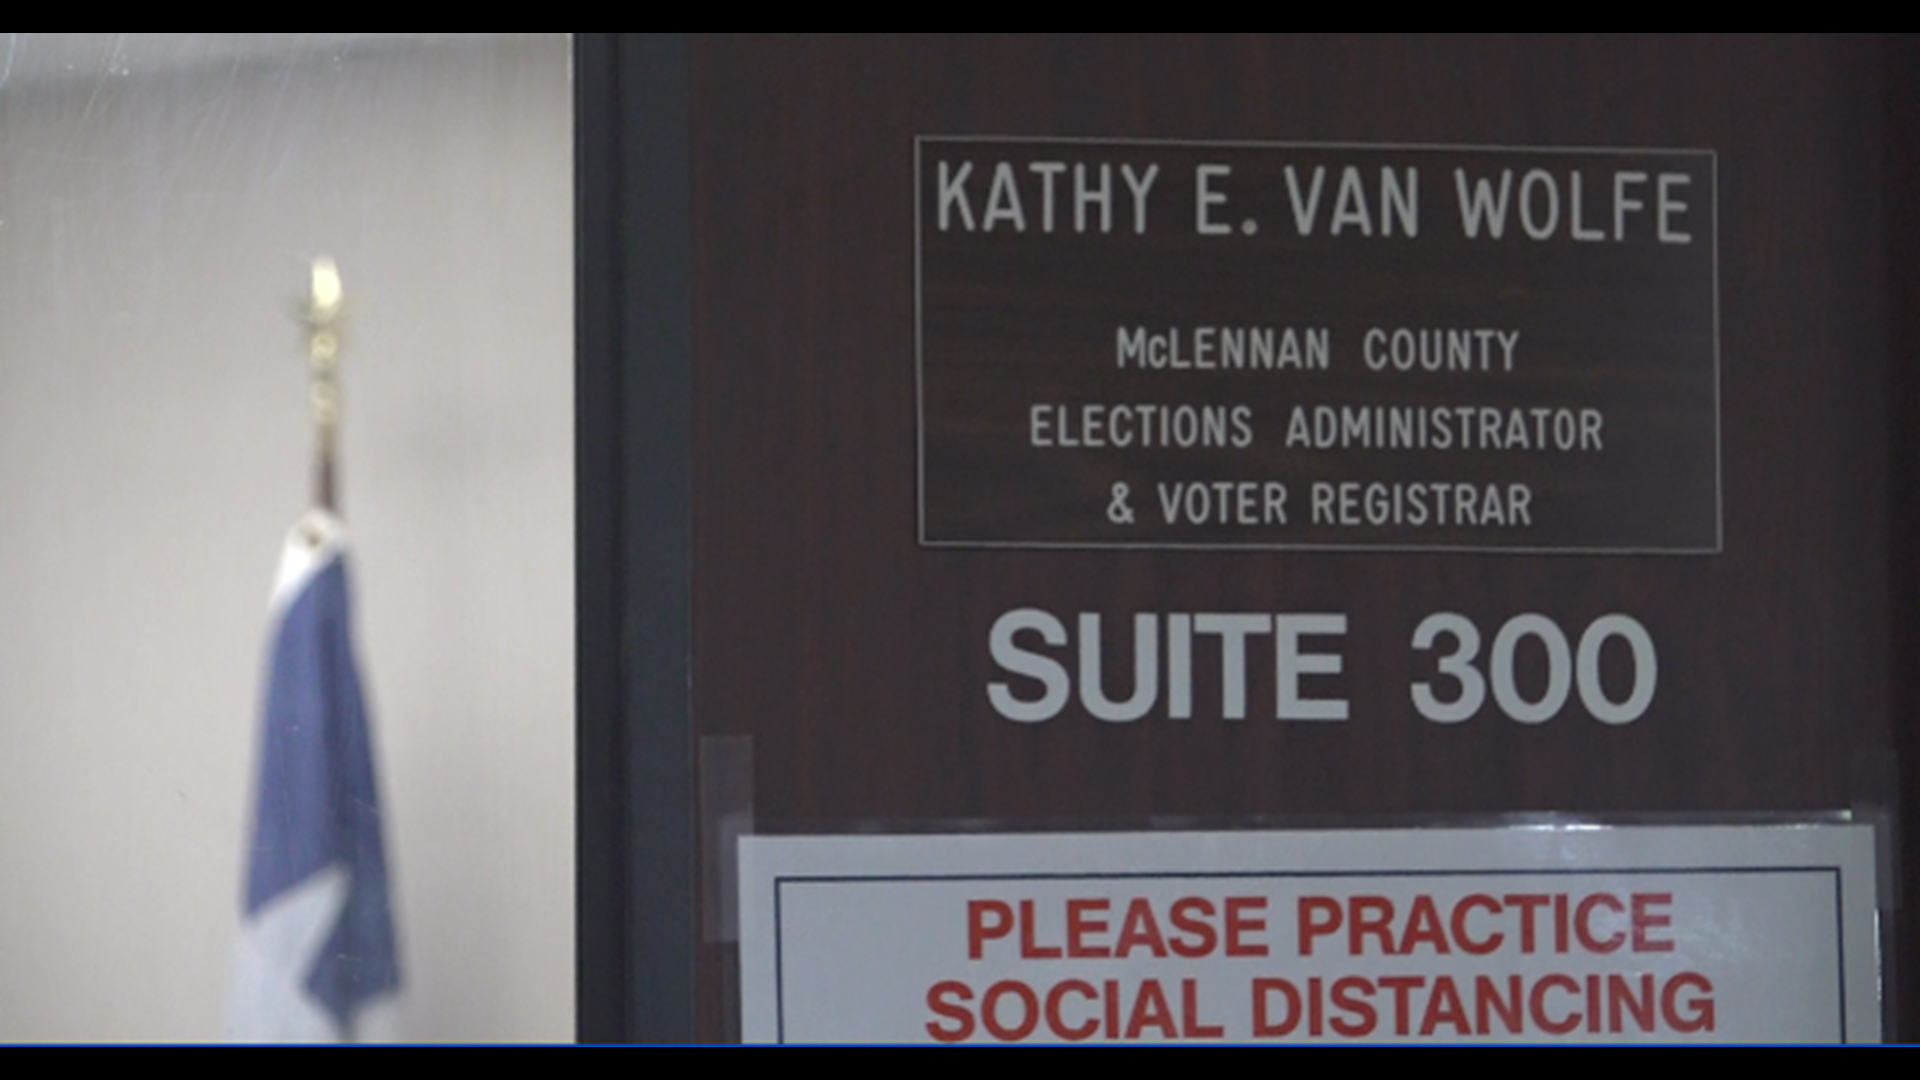 Elections Administrator Kathy Van Wolfe looks back on her time as administrator, who oversaw seven presidential elections in the county.